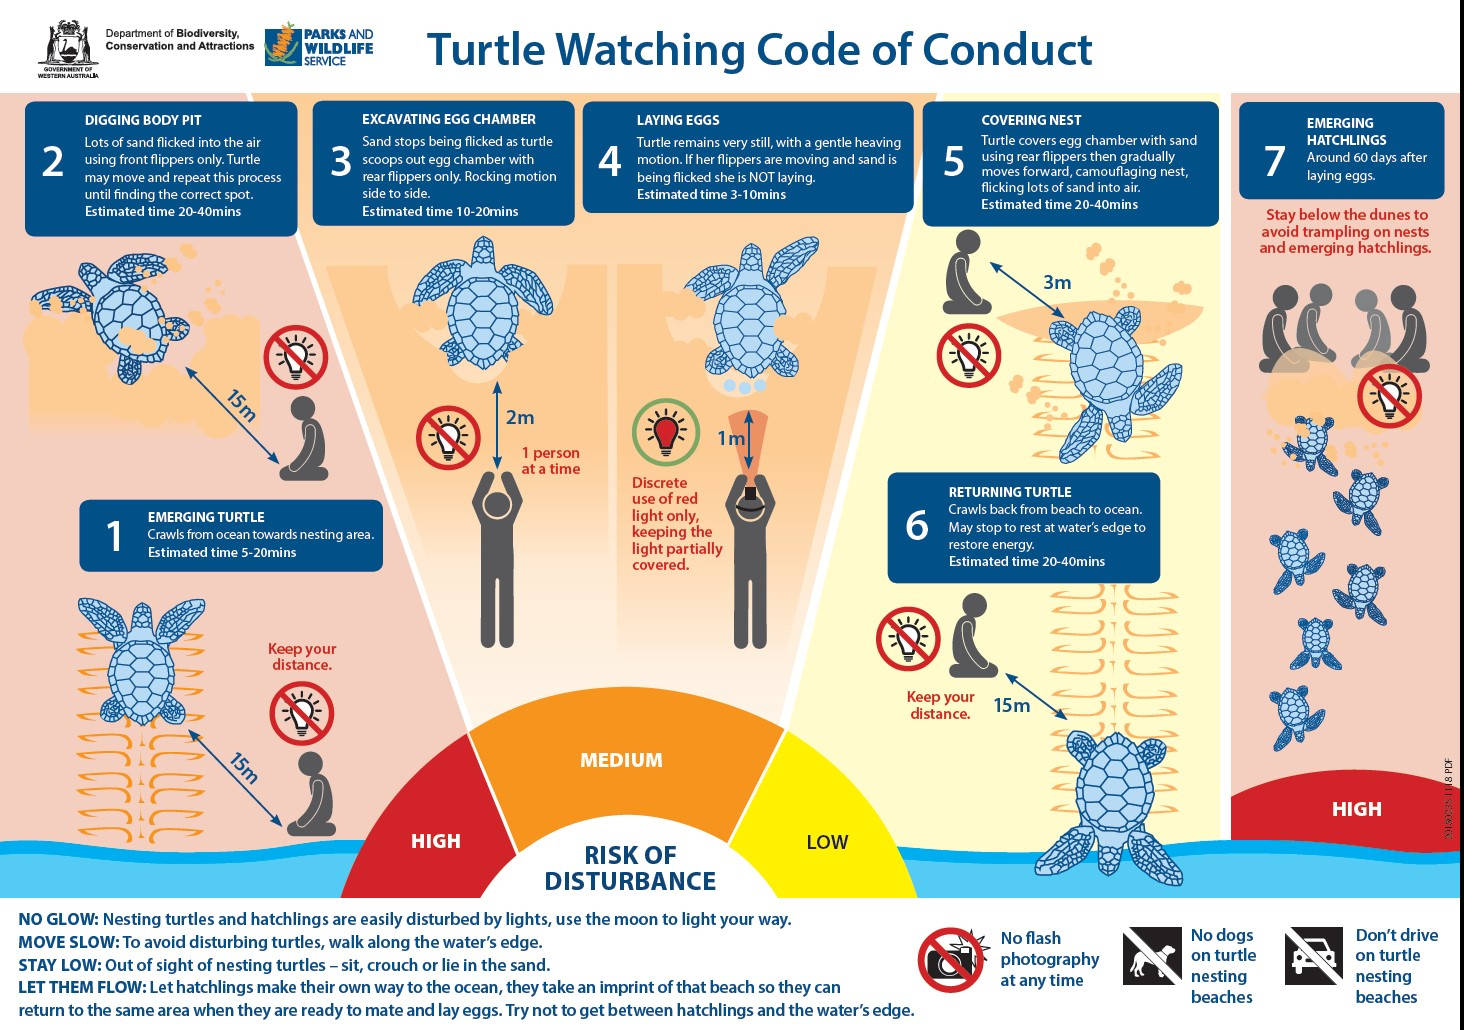 Code for watching turtles